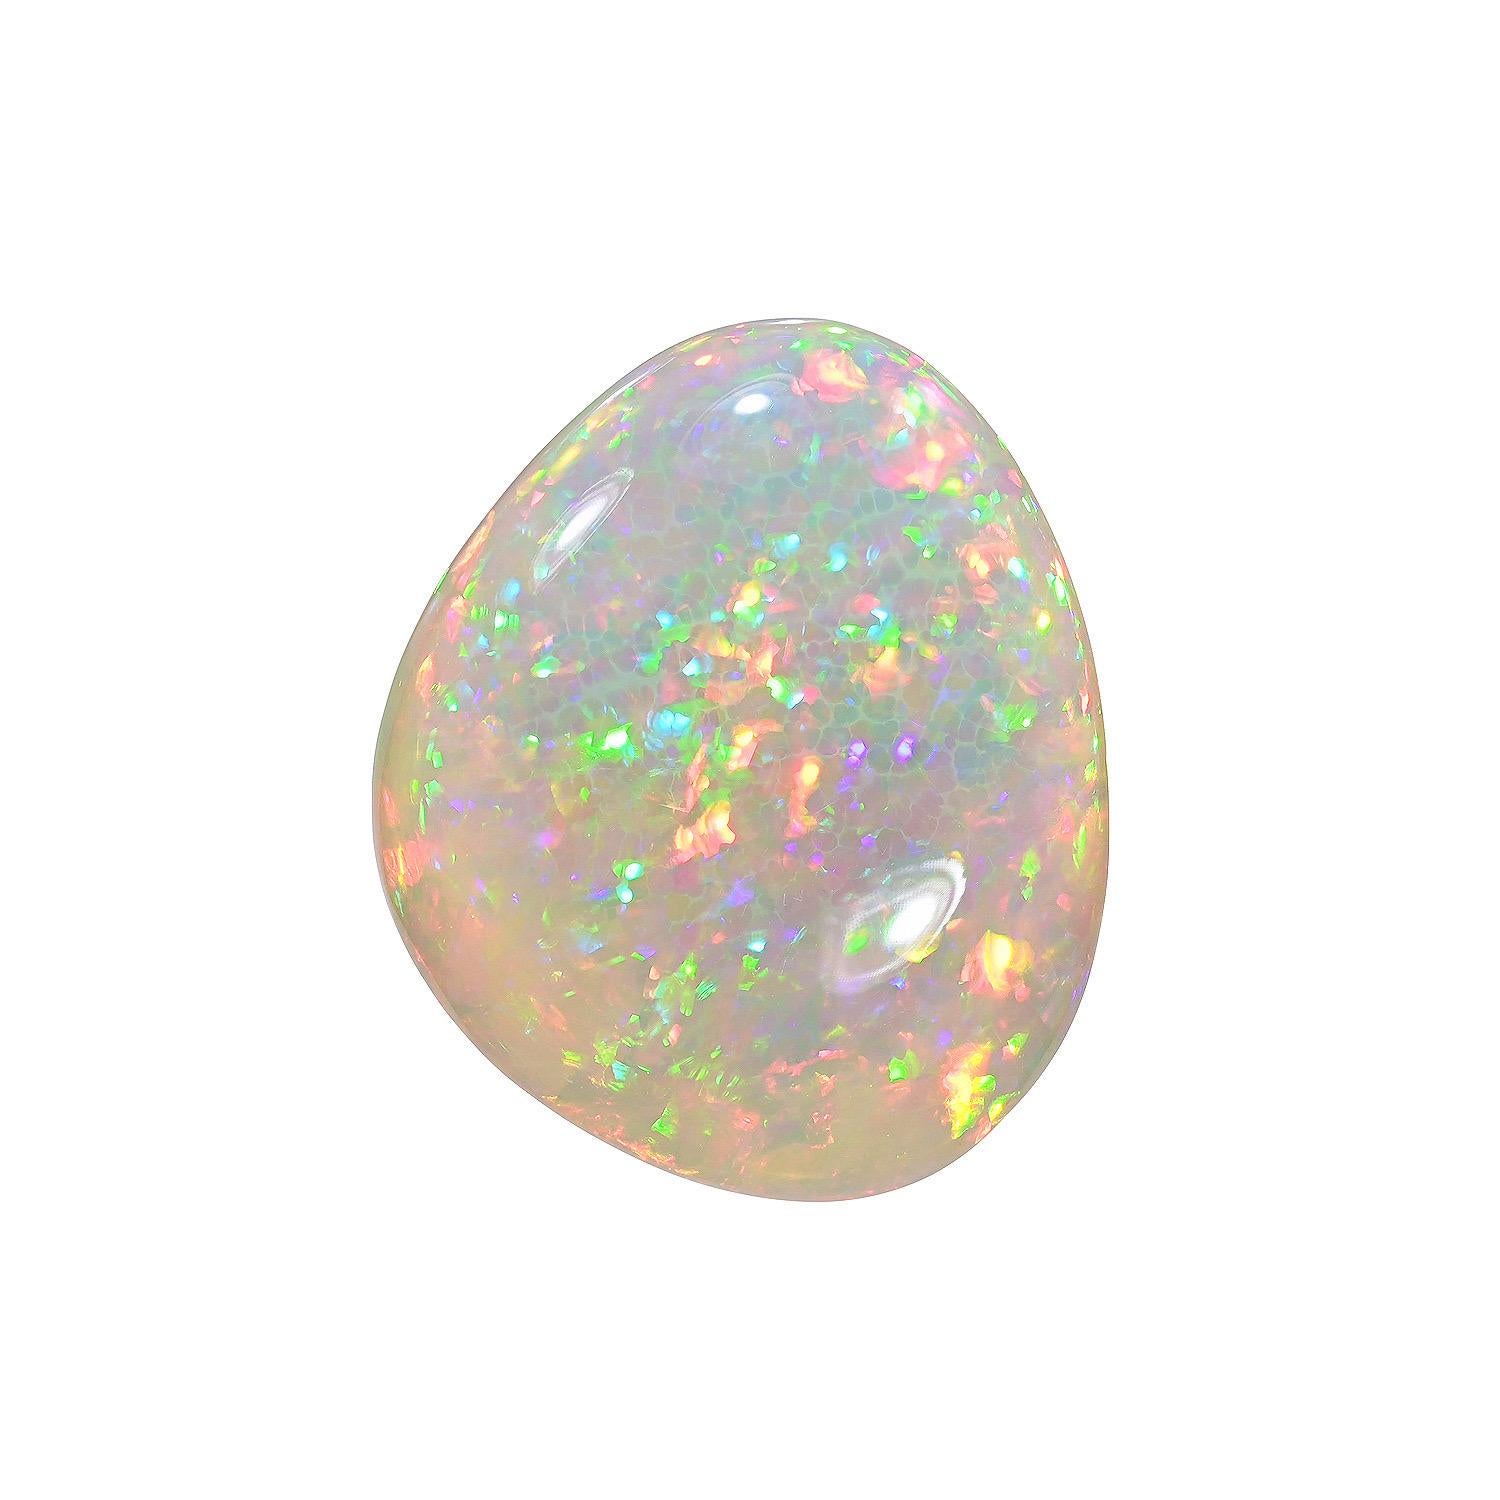 Natural 51.39 carat free-form Ethiopian Opal loose gemstone, offered unmounted to an exclusive gem collector.
Returns are accepted and paid by us within 7 days of delivery.
We offer supreme custom jewelry work upon request. Please contact us for